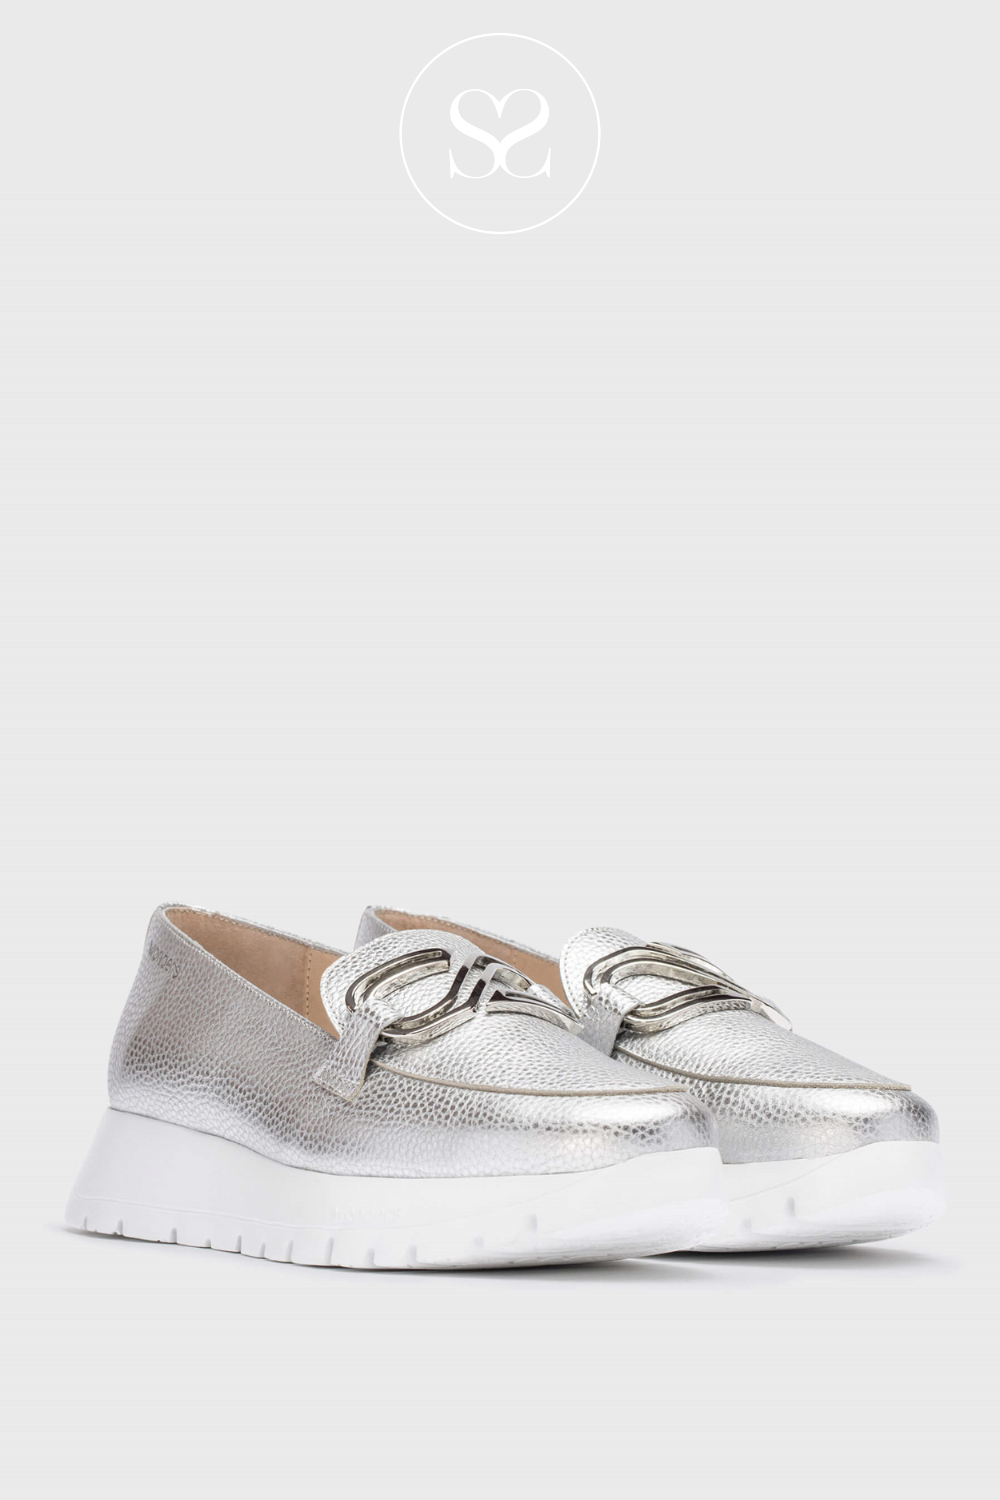 WONDERS A_2462 SILVER WEDGE FLATFORM SLIP ON SHOE WITH WHITE SOLE AND SILVER BUCKLE